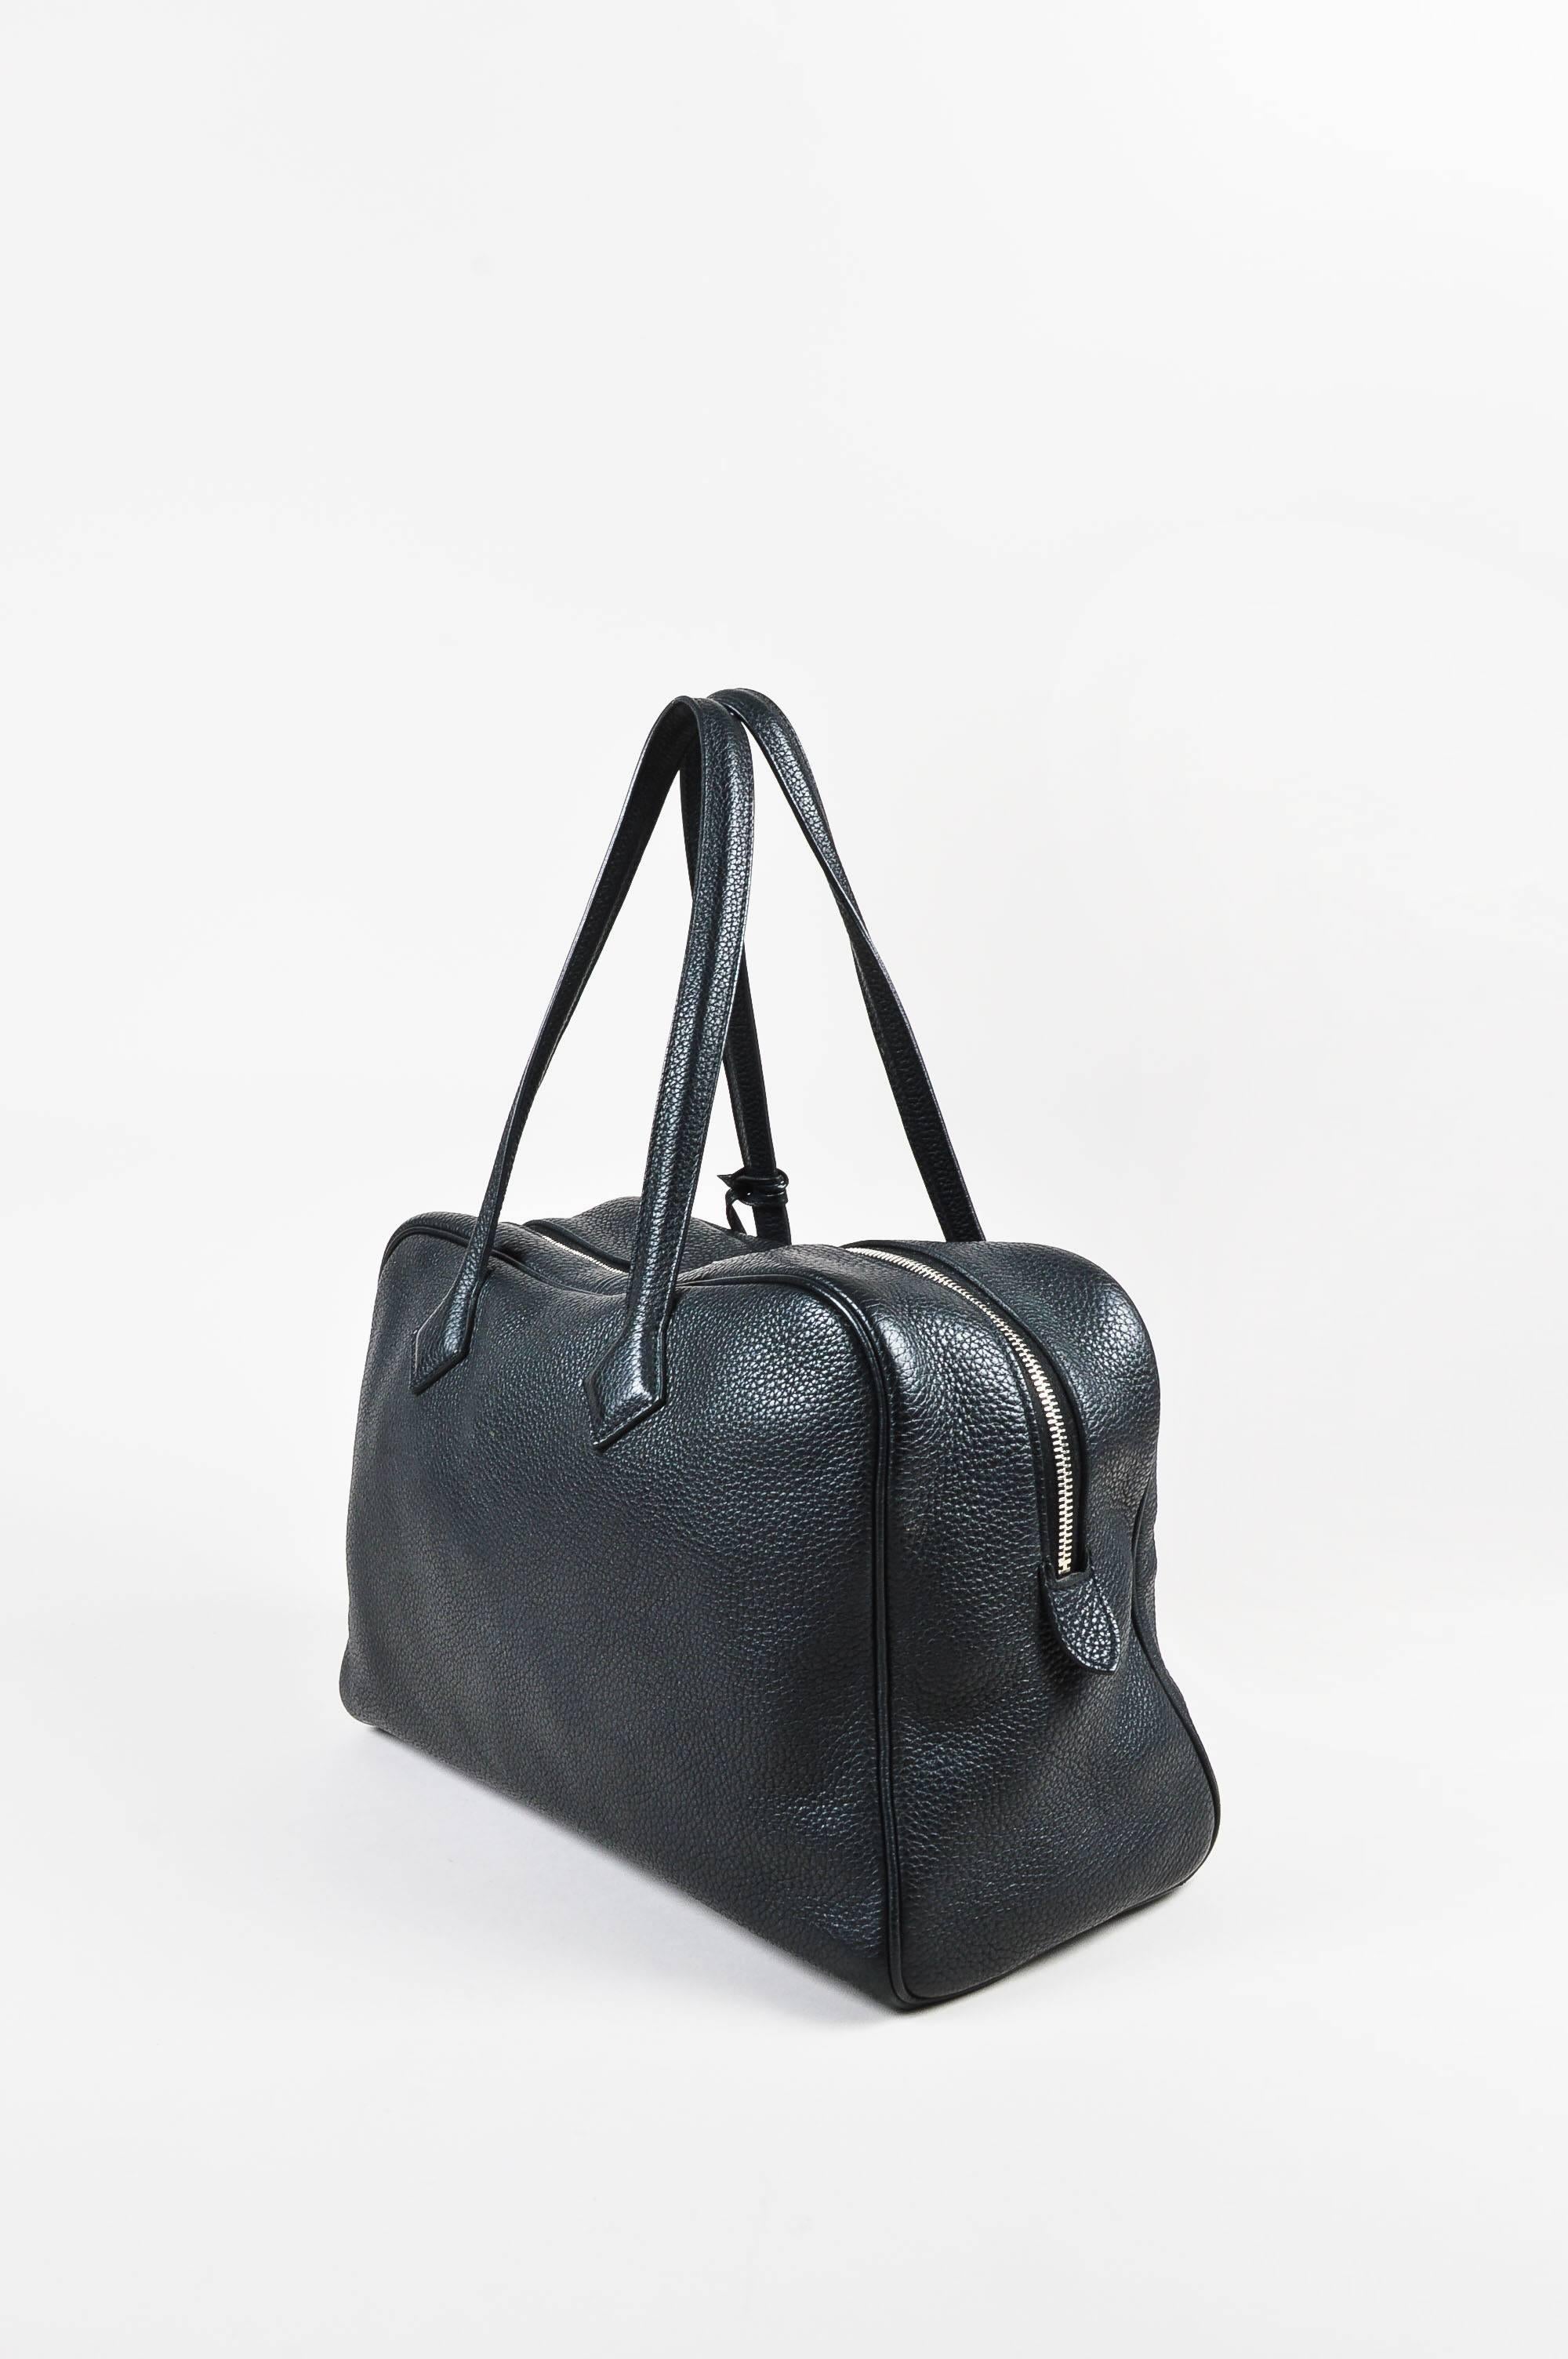 Retails for $5,500. Comes in dust bag. Black Clemence leather bag features two flat straps and double zip closure that secures with padlock and keys. Palladium hardware. Five feet on bottom. Circa 2011.

Additional measurements:
Strap Length: